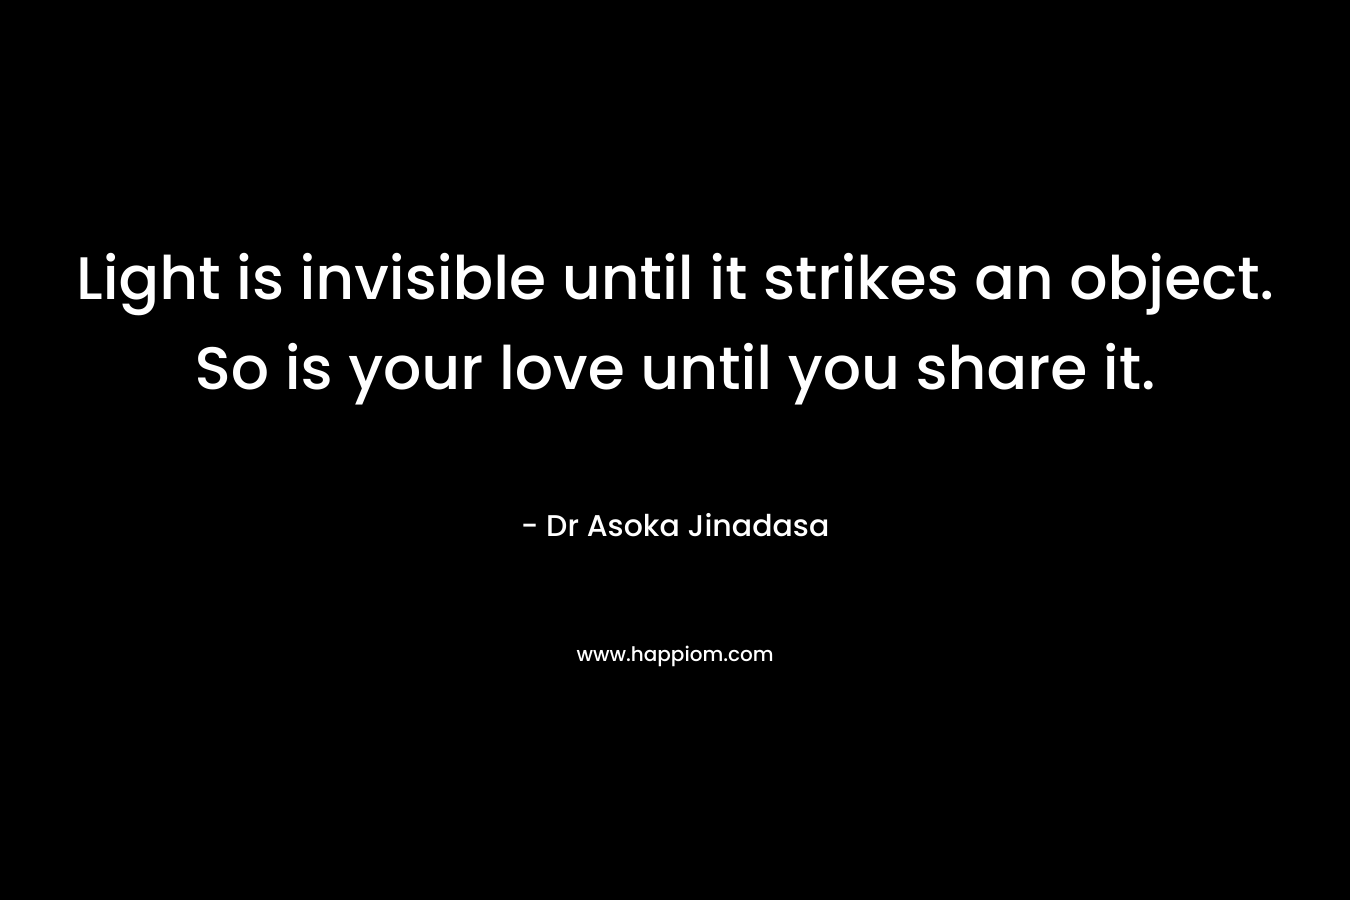 Light is invisible until it strikes an object. So is your love until you share it.